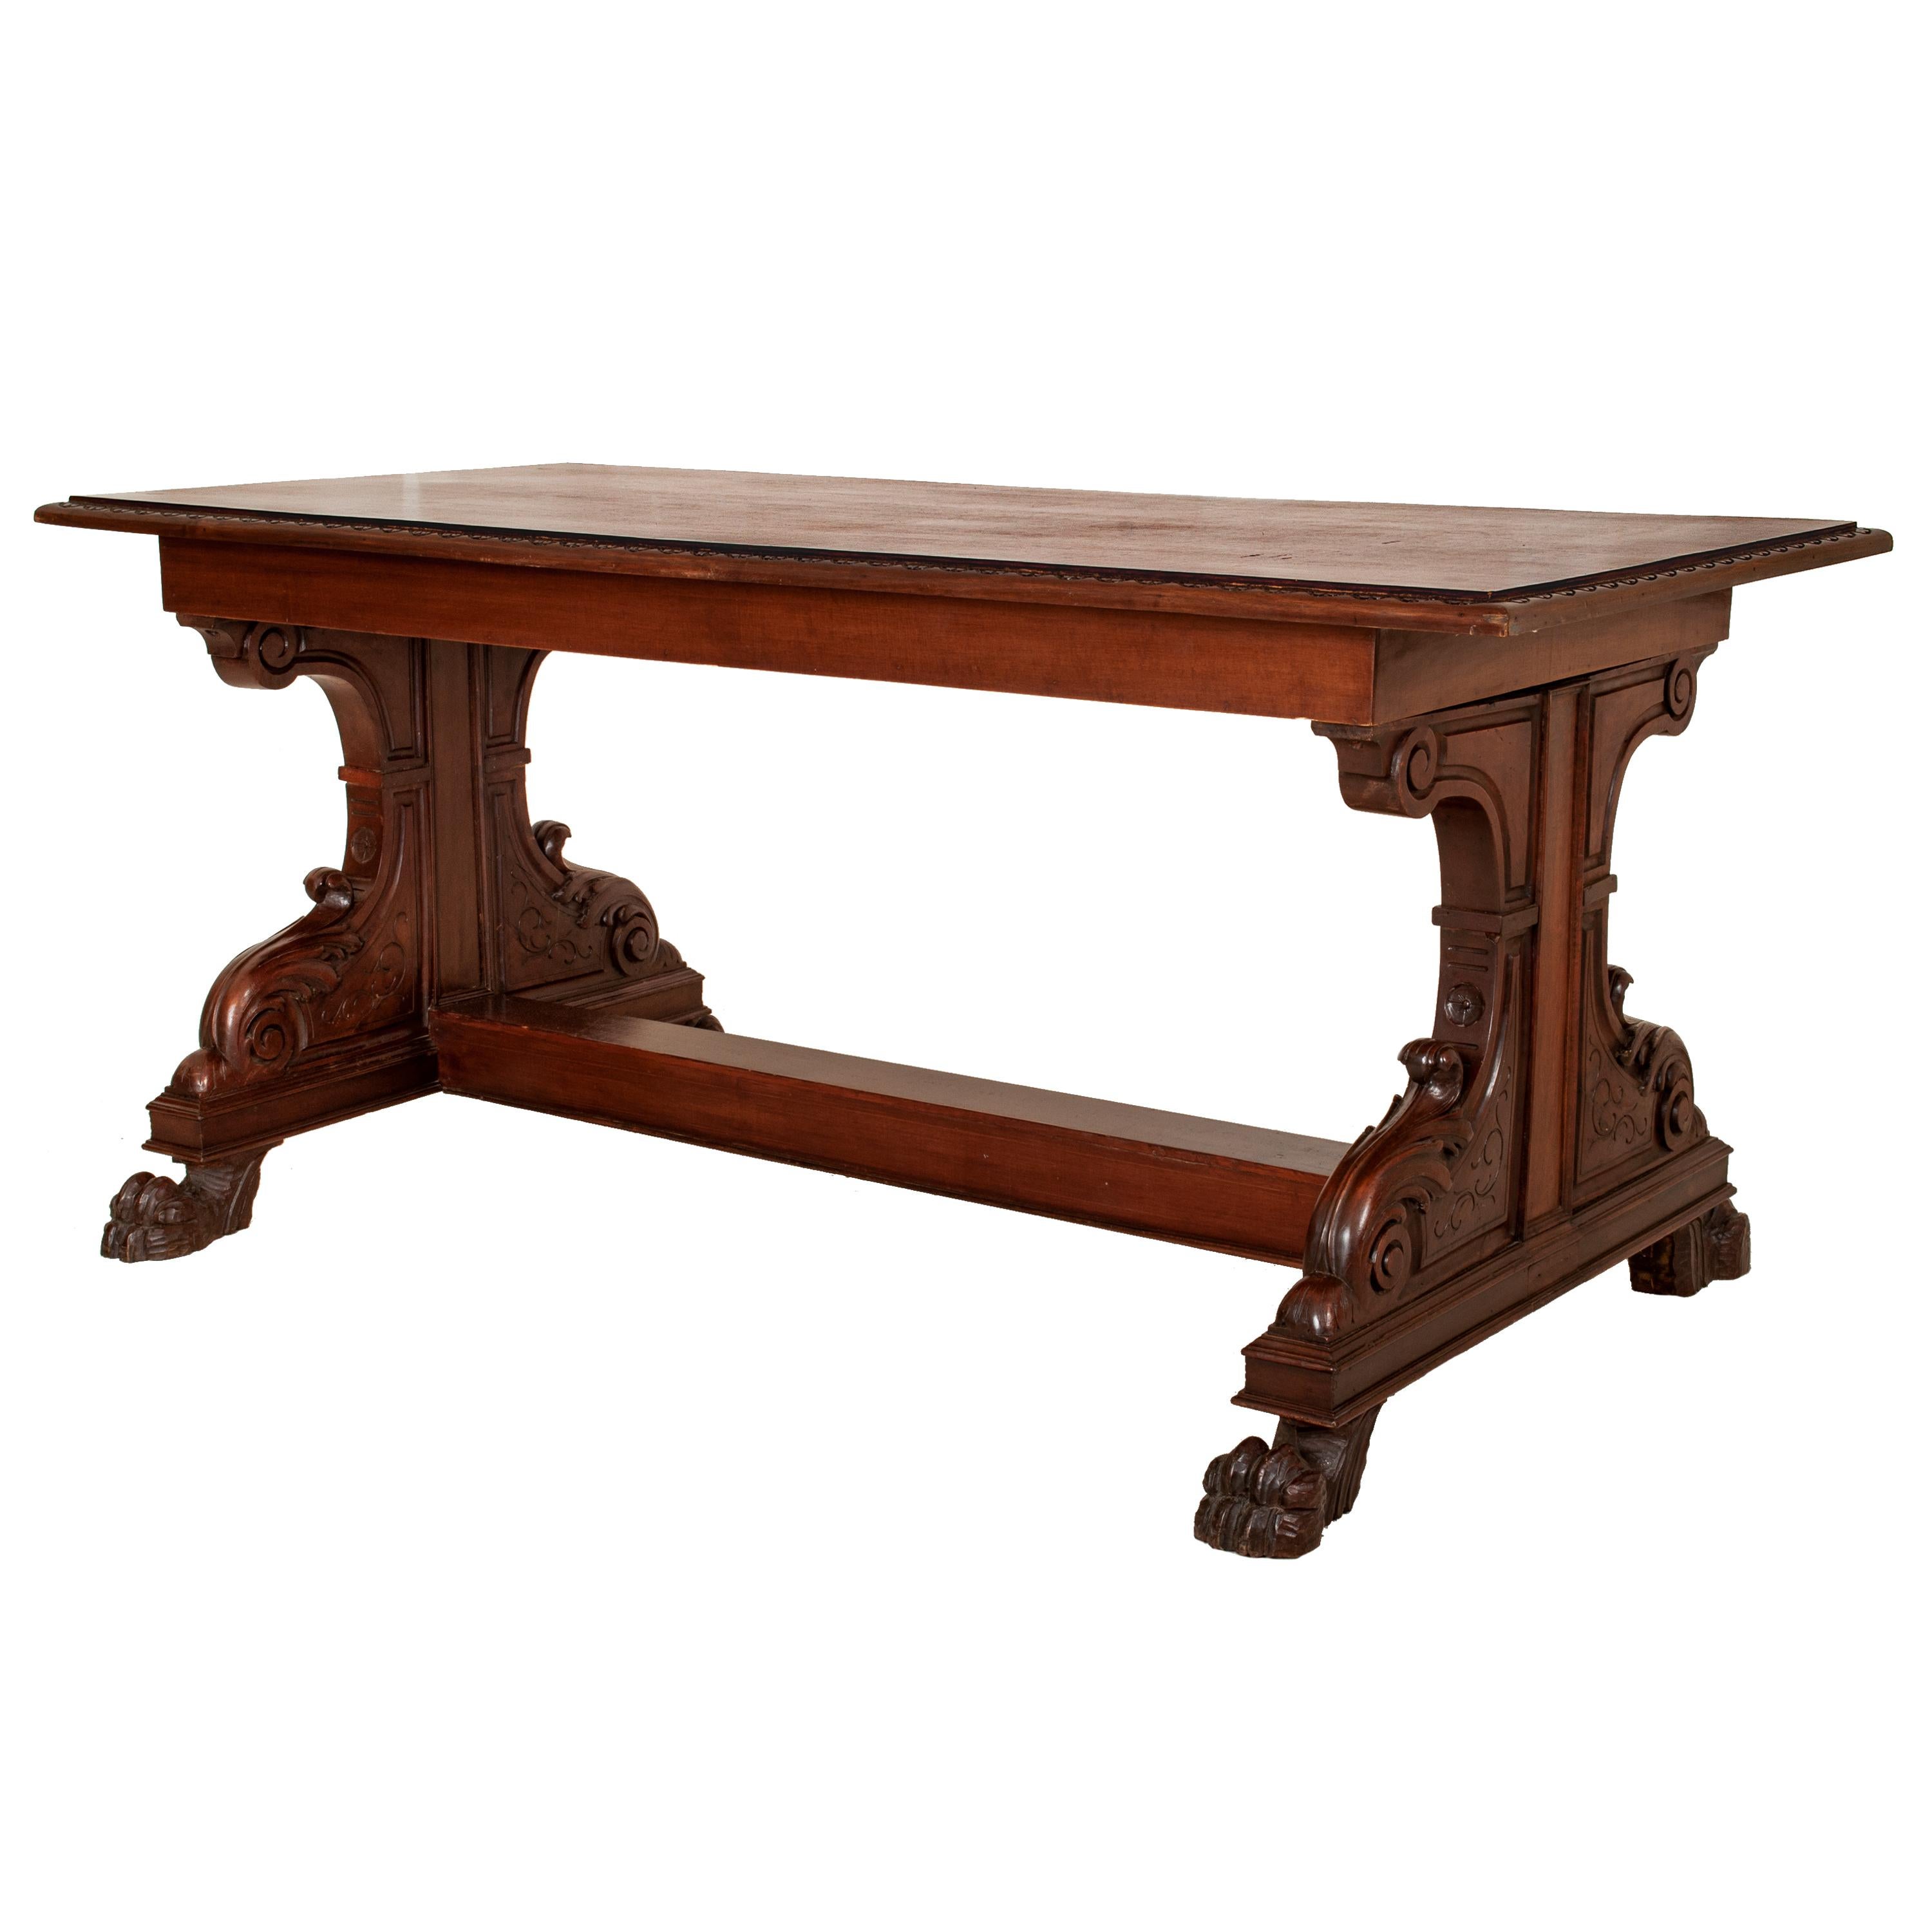 Antique Italian Carved Walnut Renaissance Revival Library Serving Table, 1870 For Sale 1